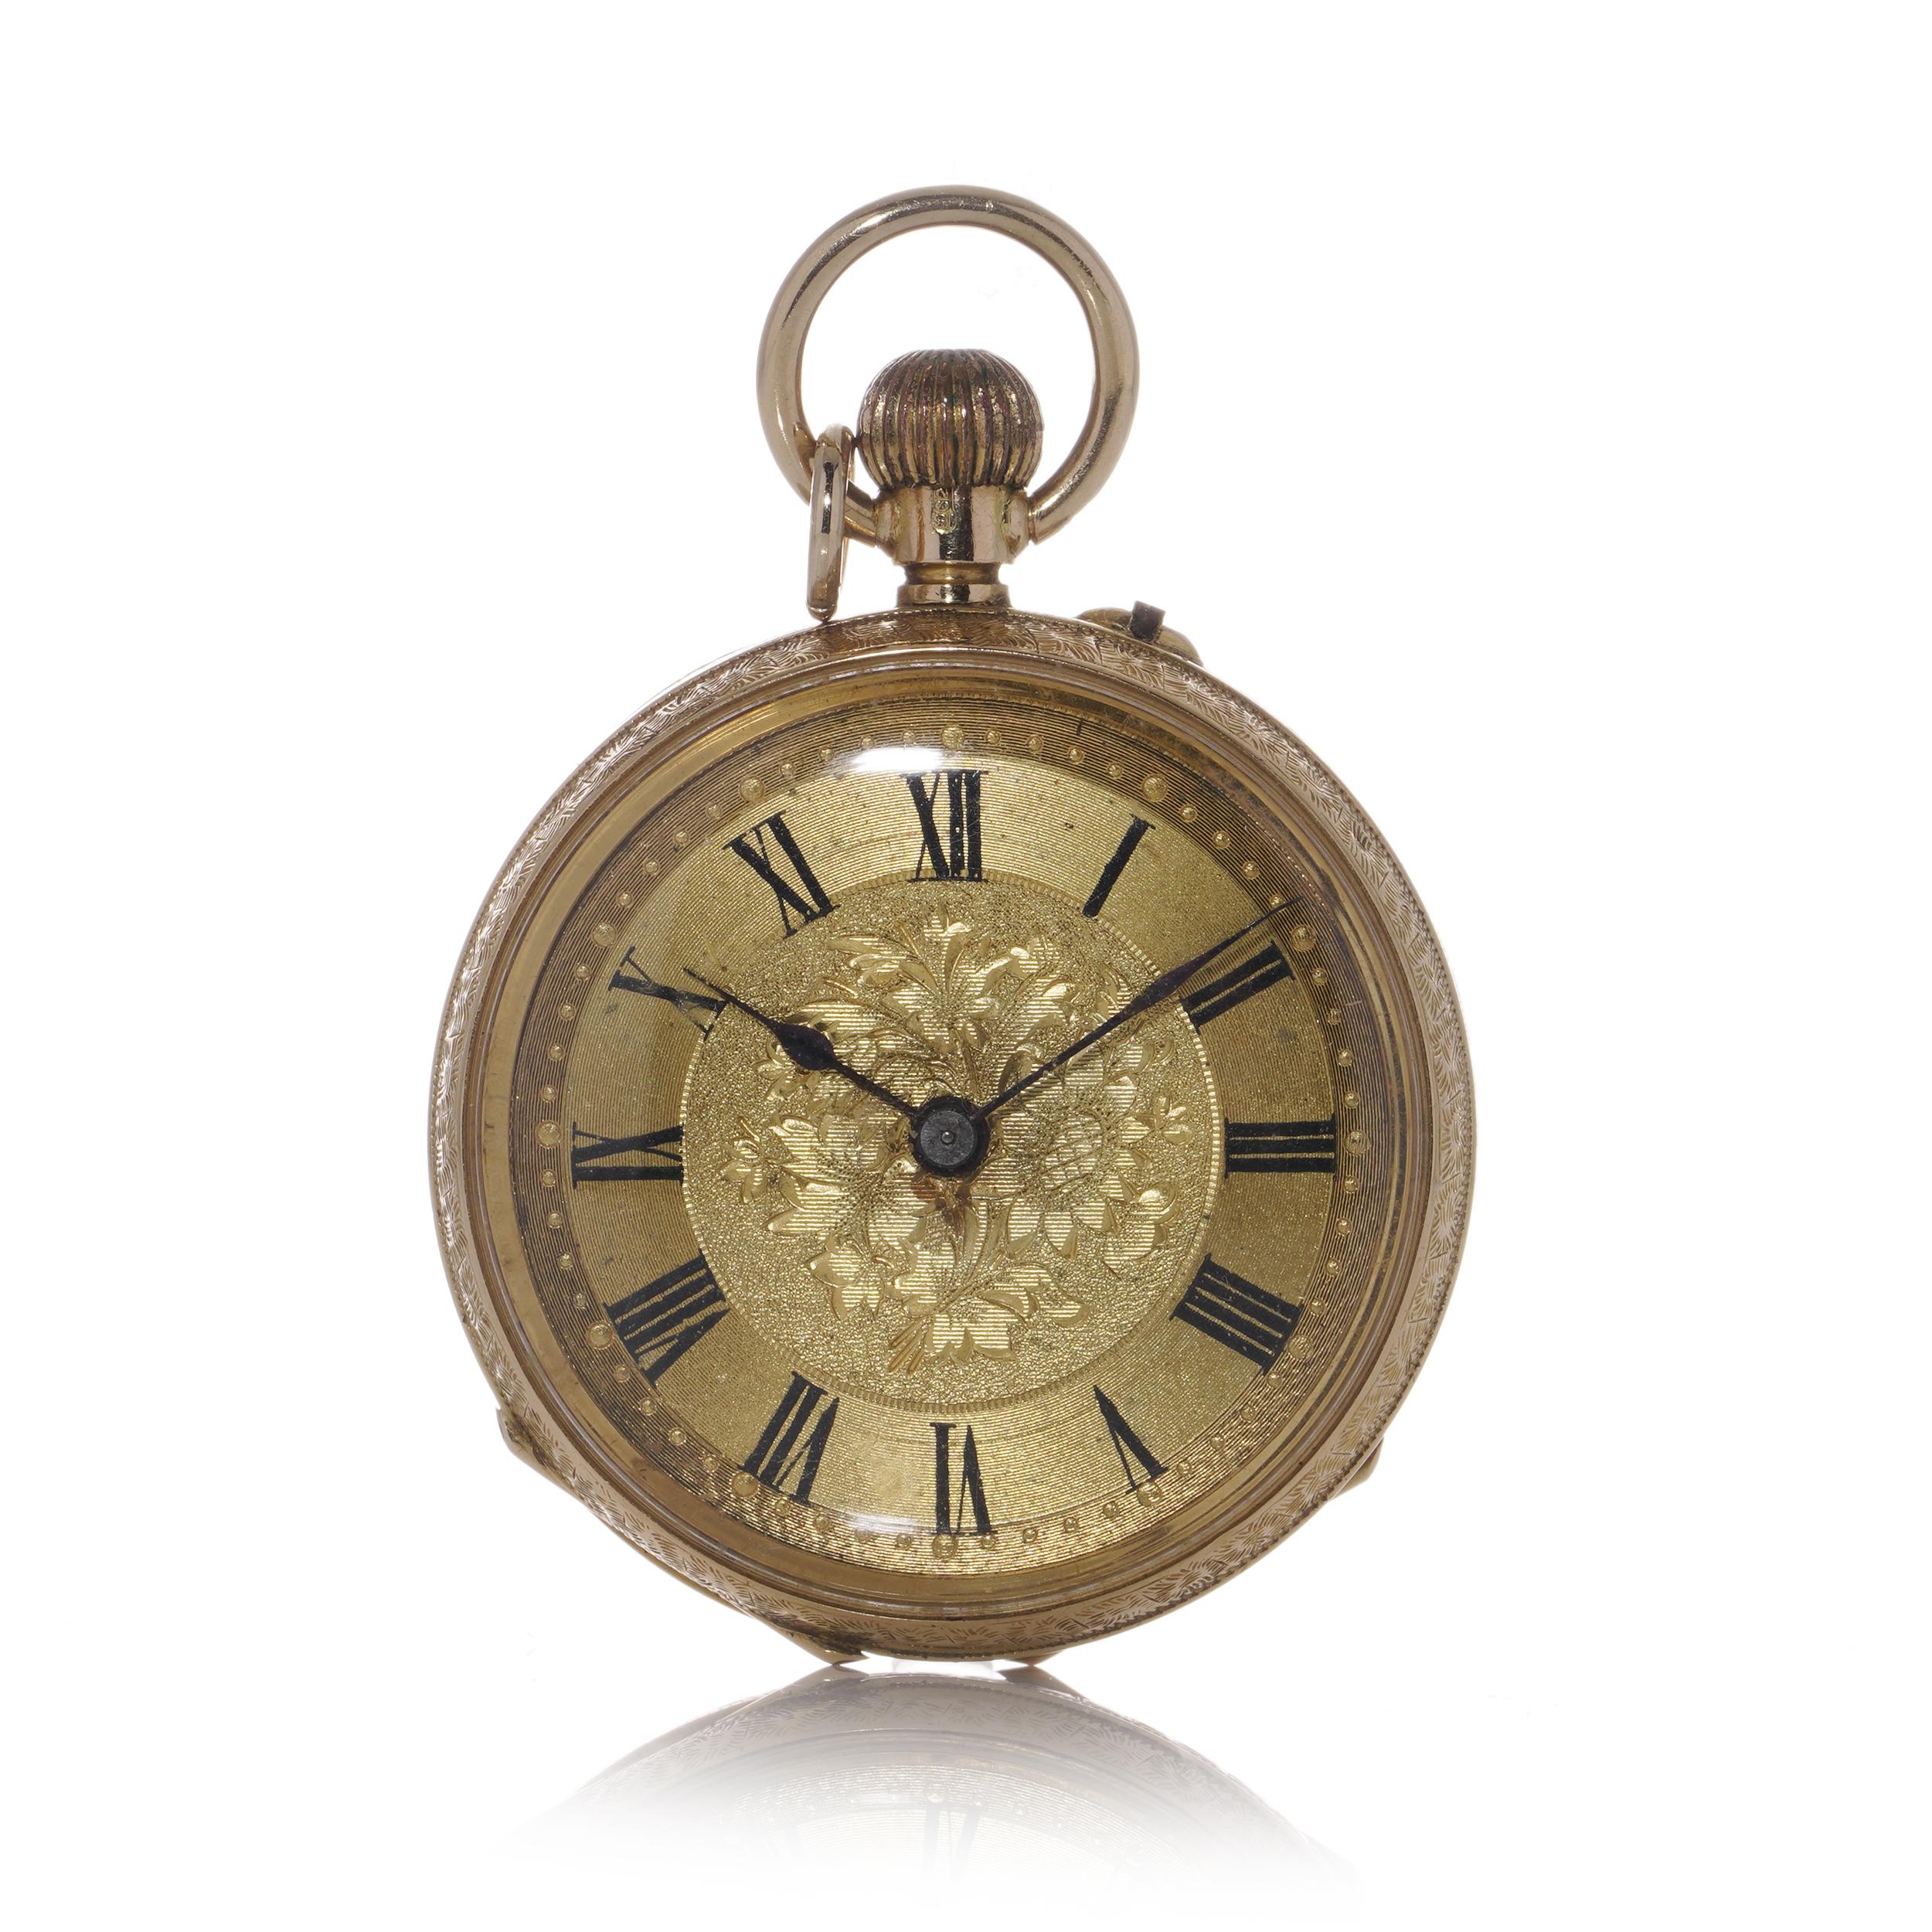 Antique 15kt gold open-face pocket watch.
Made in England, London, Circa 1900-1910
Fully hallmarked 15KT Gold with London Import Hallmarks.

The timekeeping accuracy of the watches has not been verified. 
It's recommended that they undergo a service